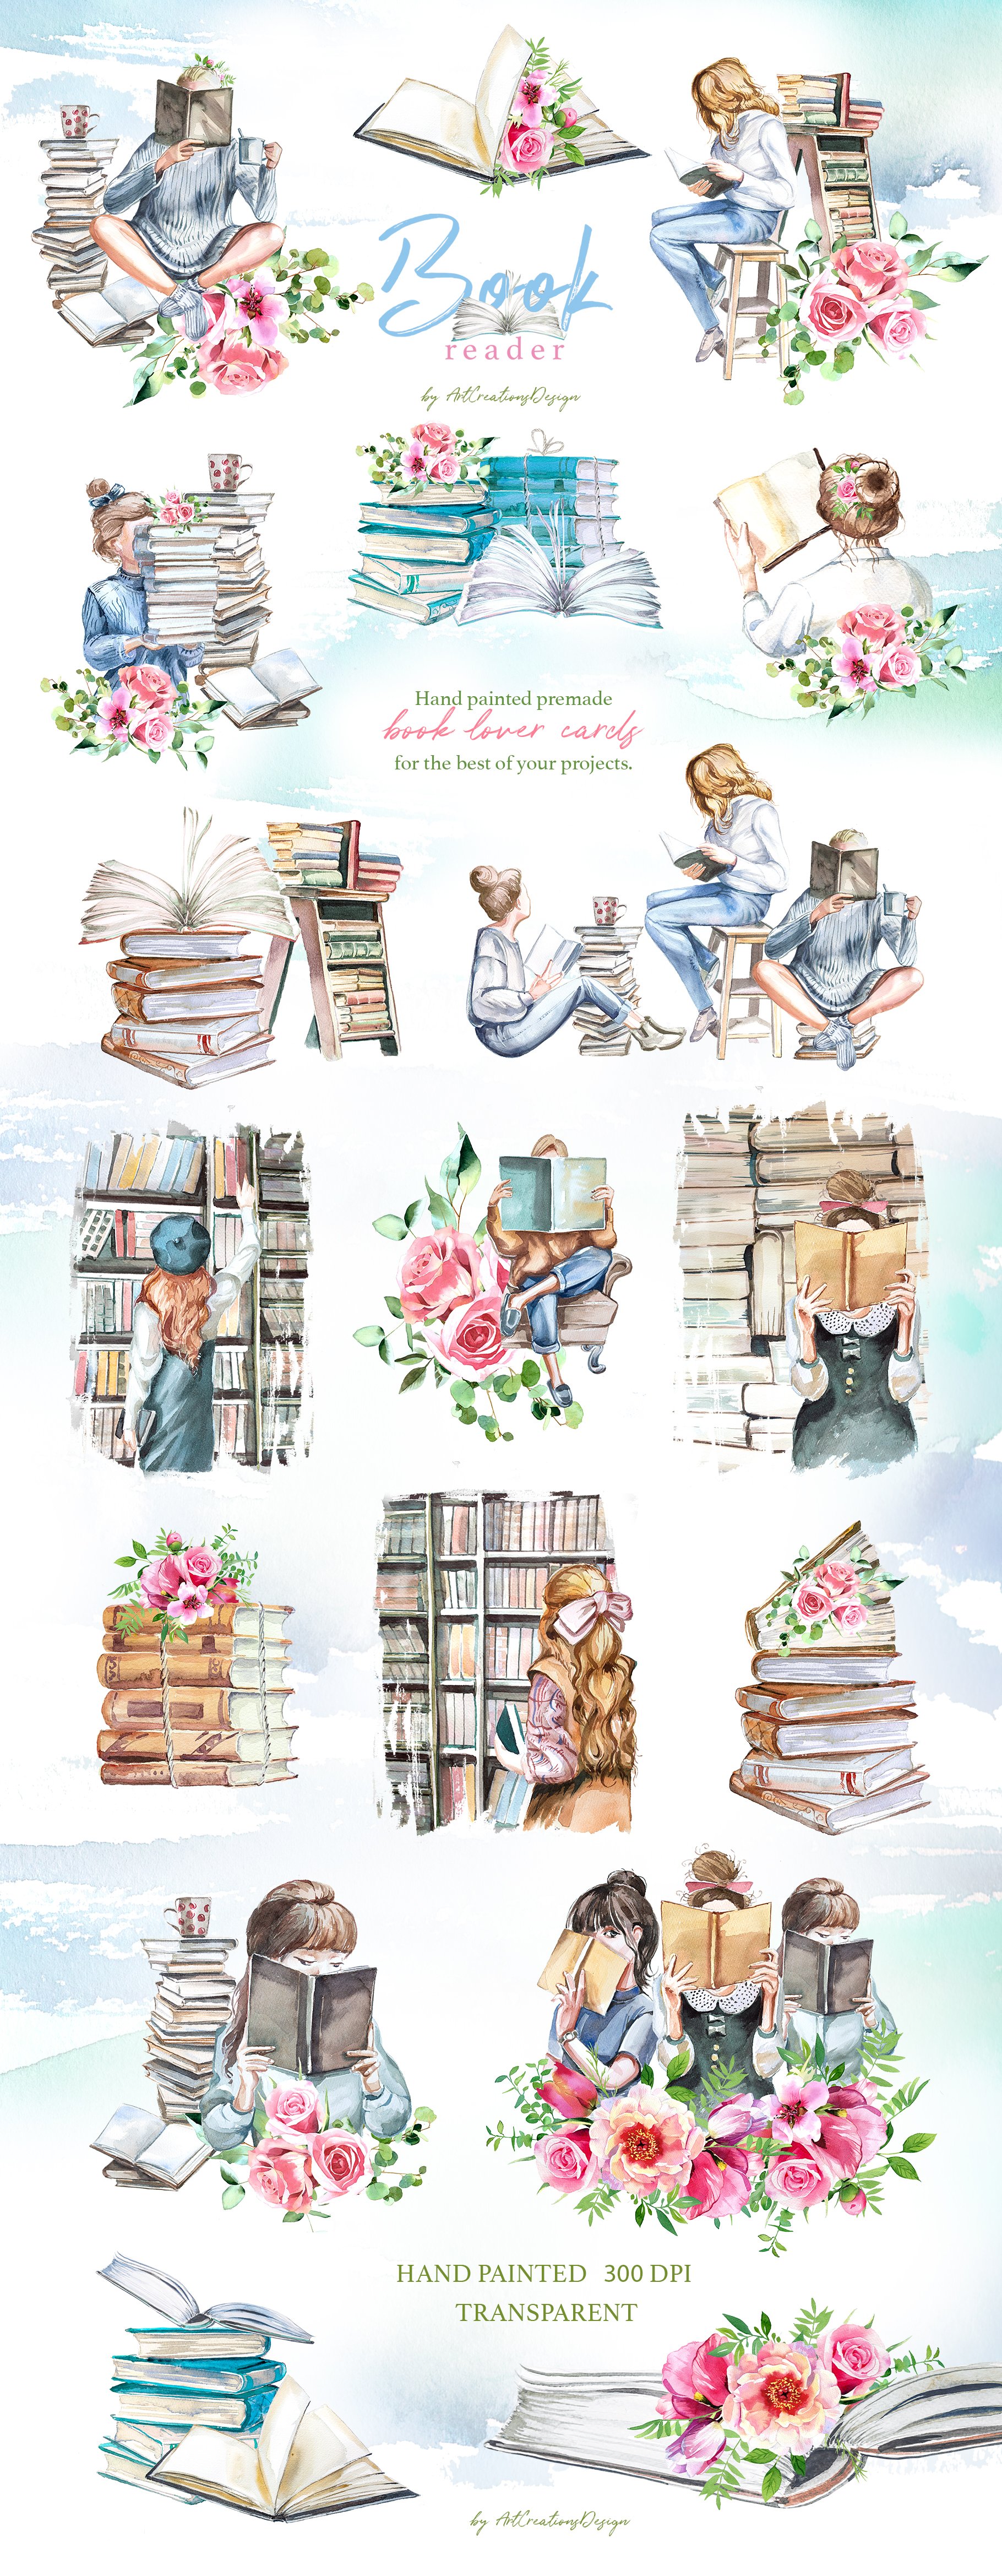 Hand painted pre-made book lover cards for your project.